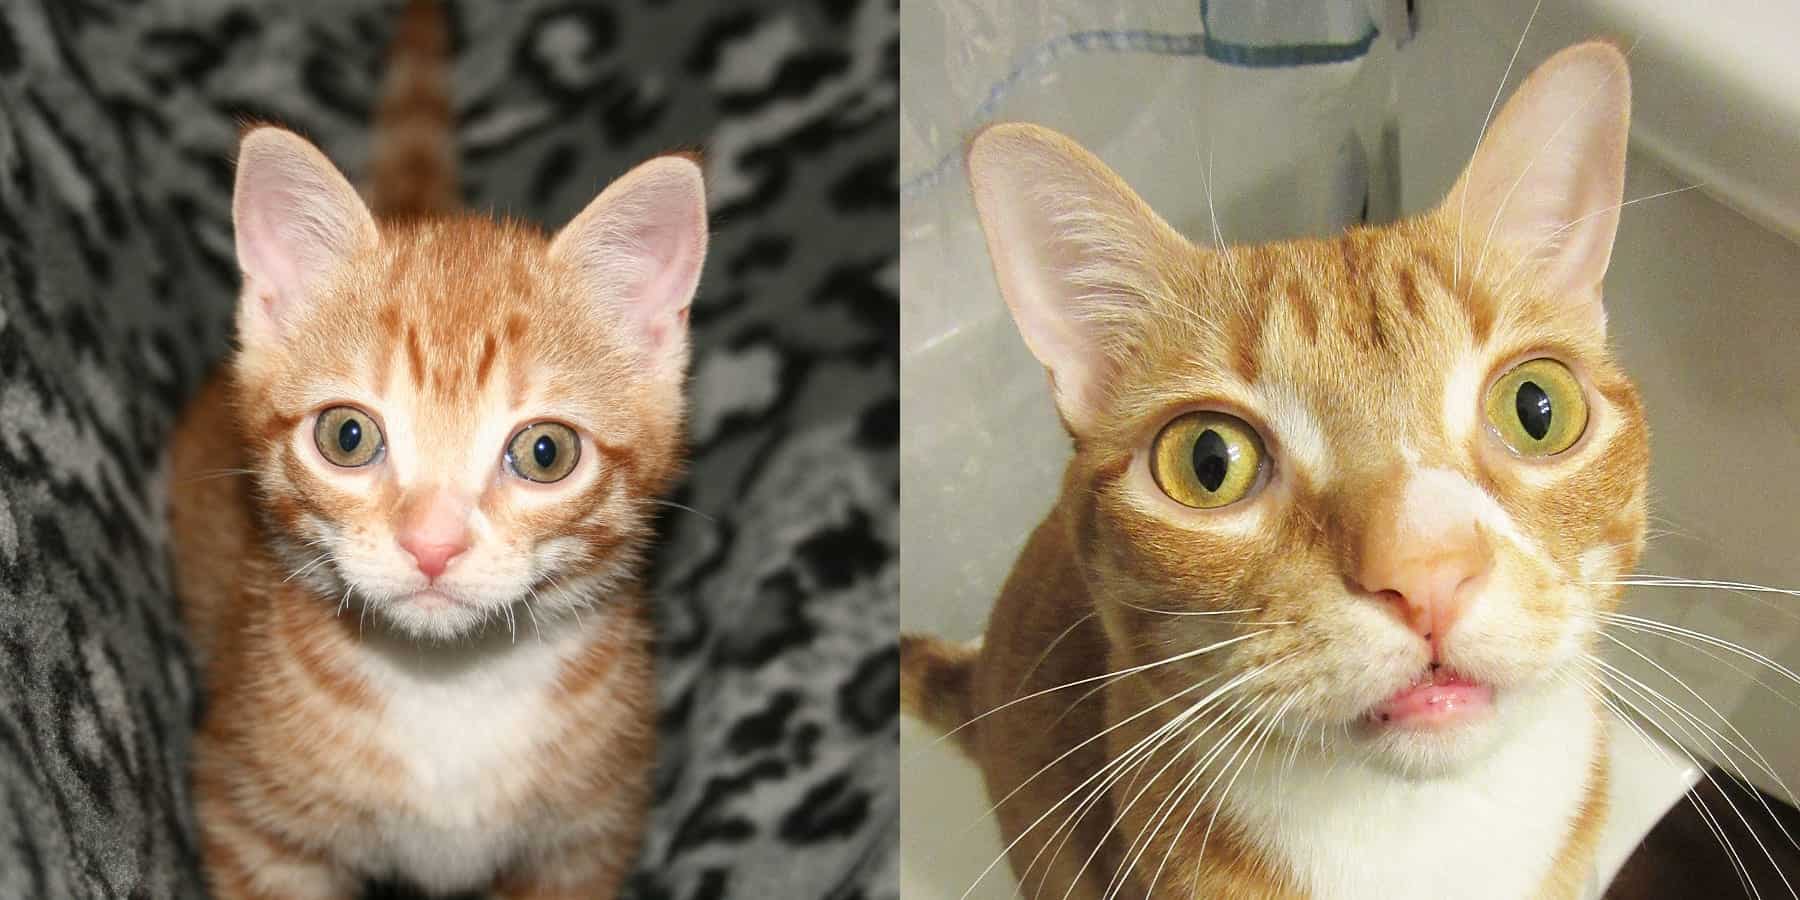 Marmalade has such a distinctive face, we love it!